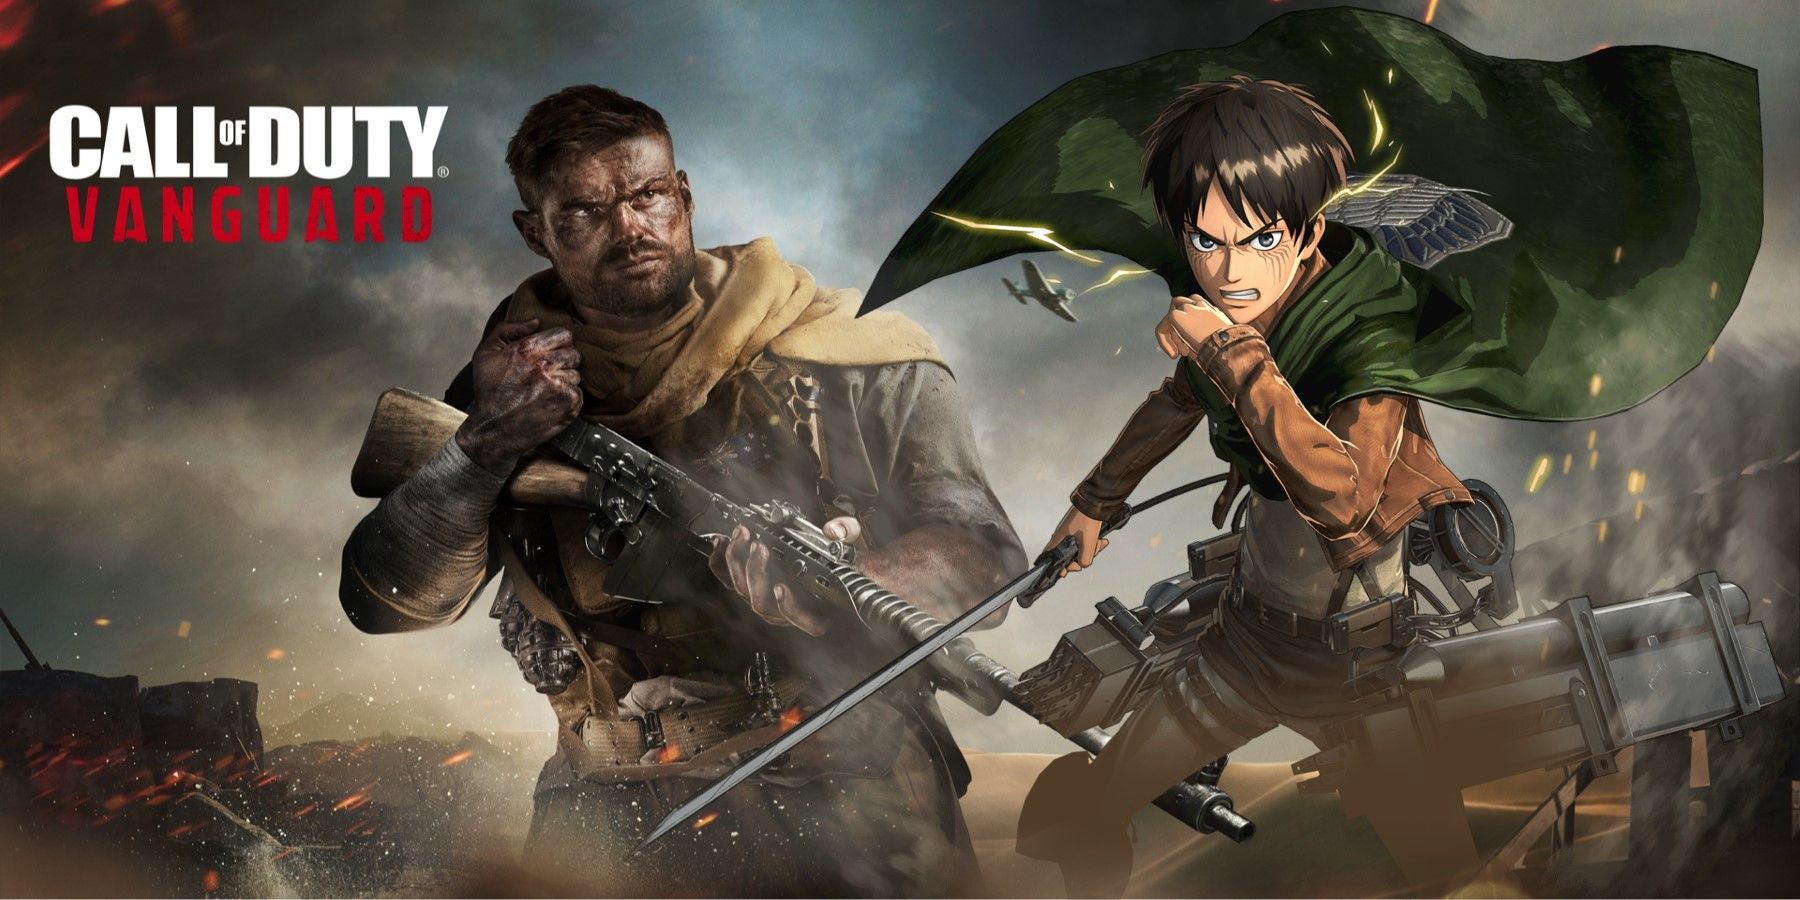 Call of Duty: Vanguard Leaks Attack on Titan Crossover